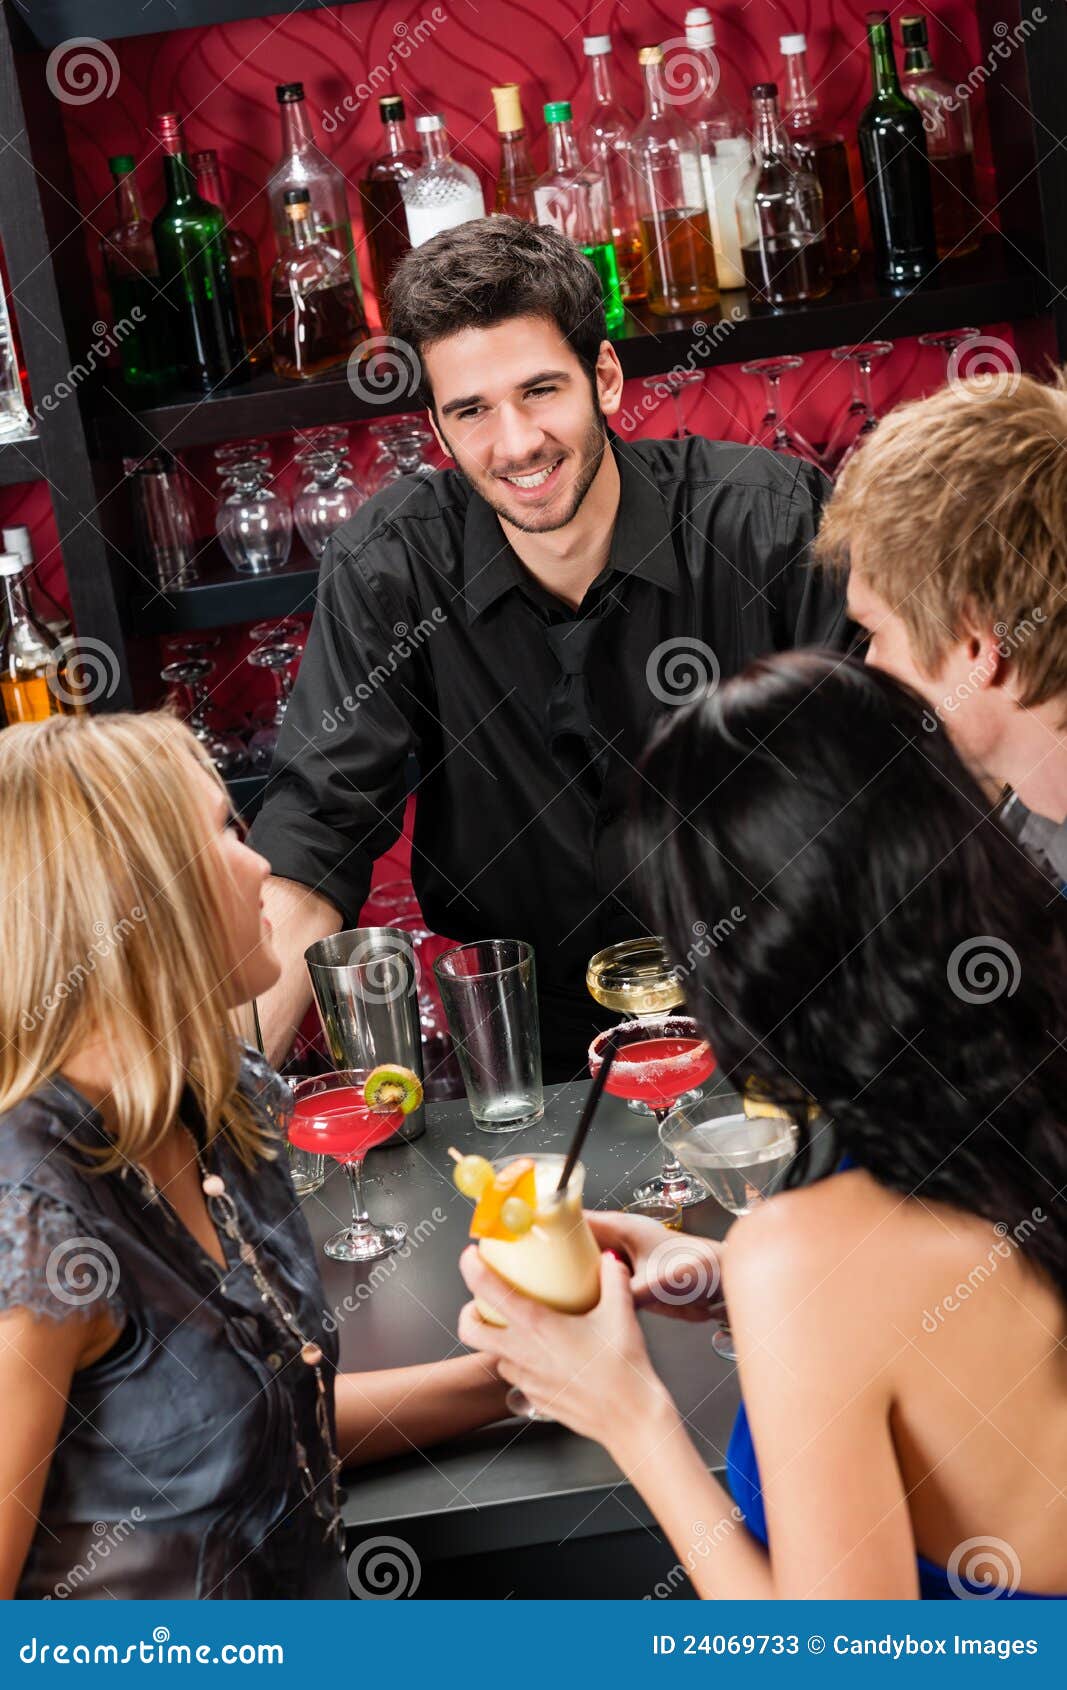 barman chatting with friends drinking at bar